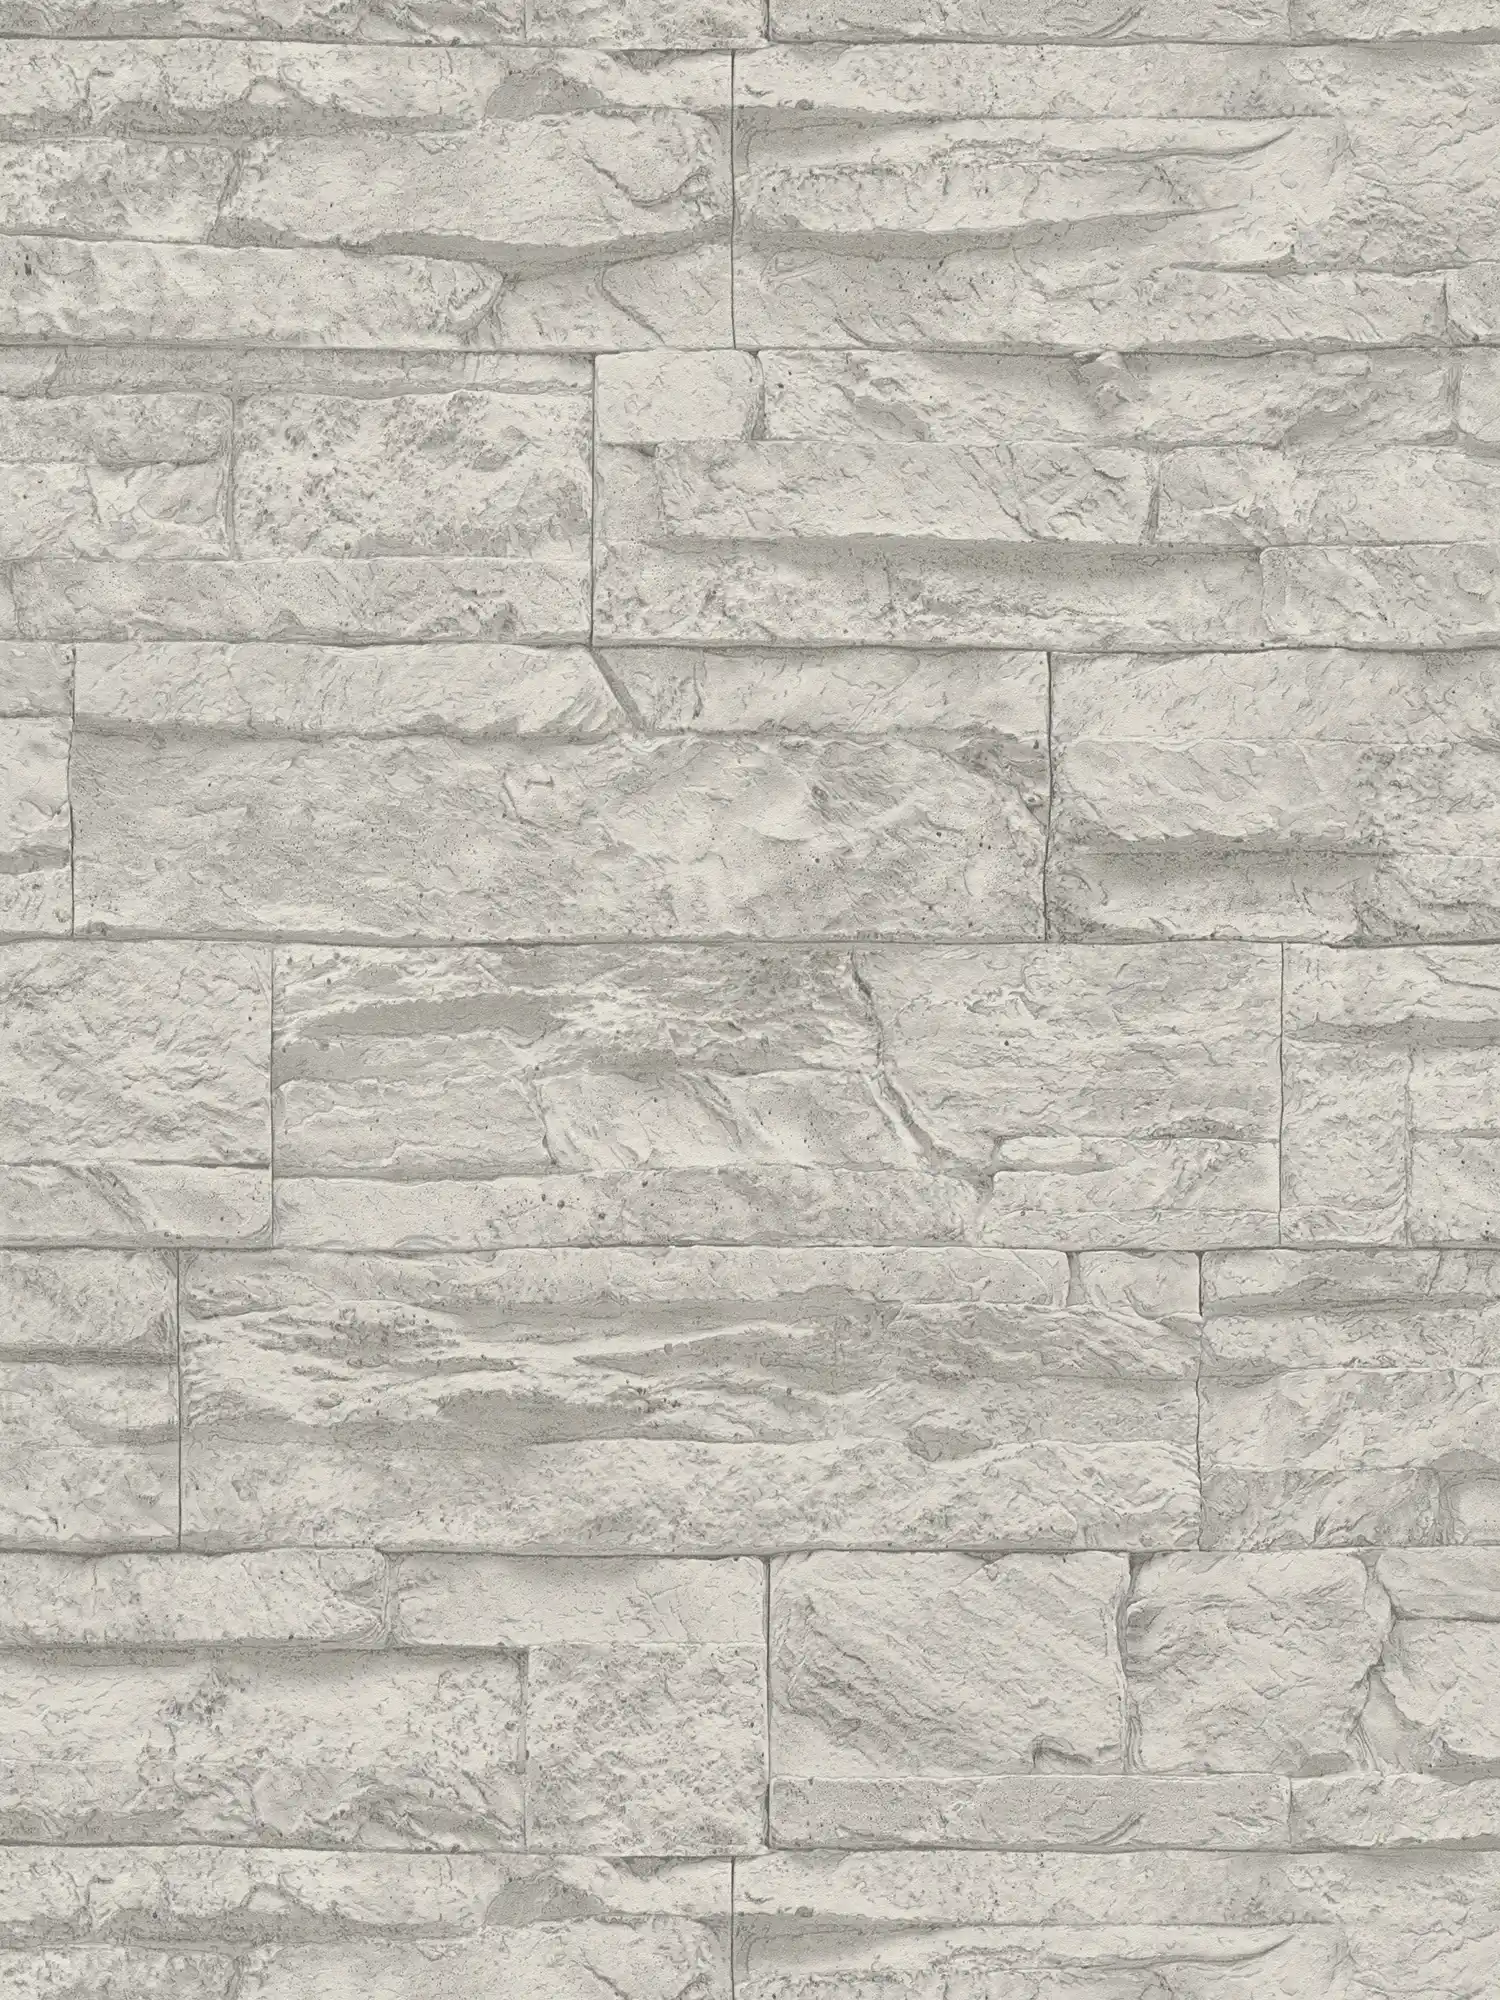 Wallpaper natural stone look detailed & realistic - grey, white
